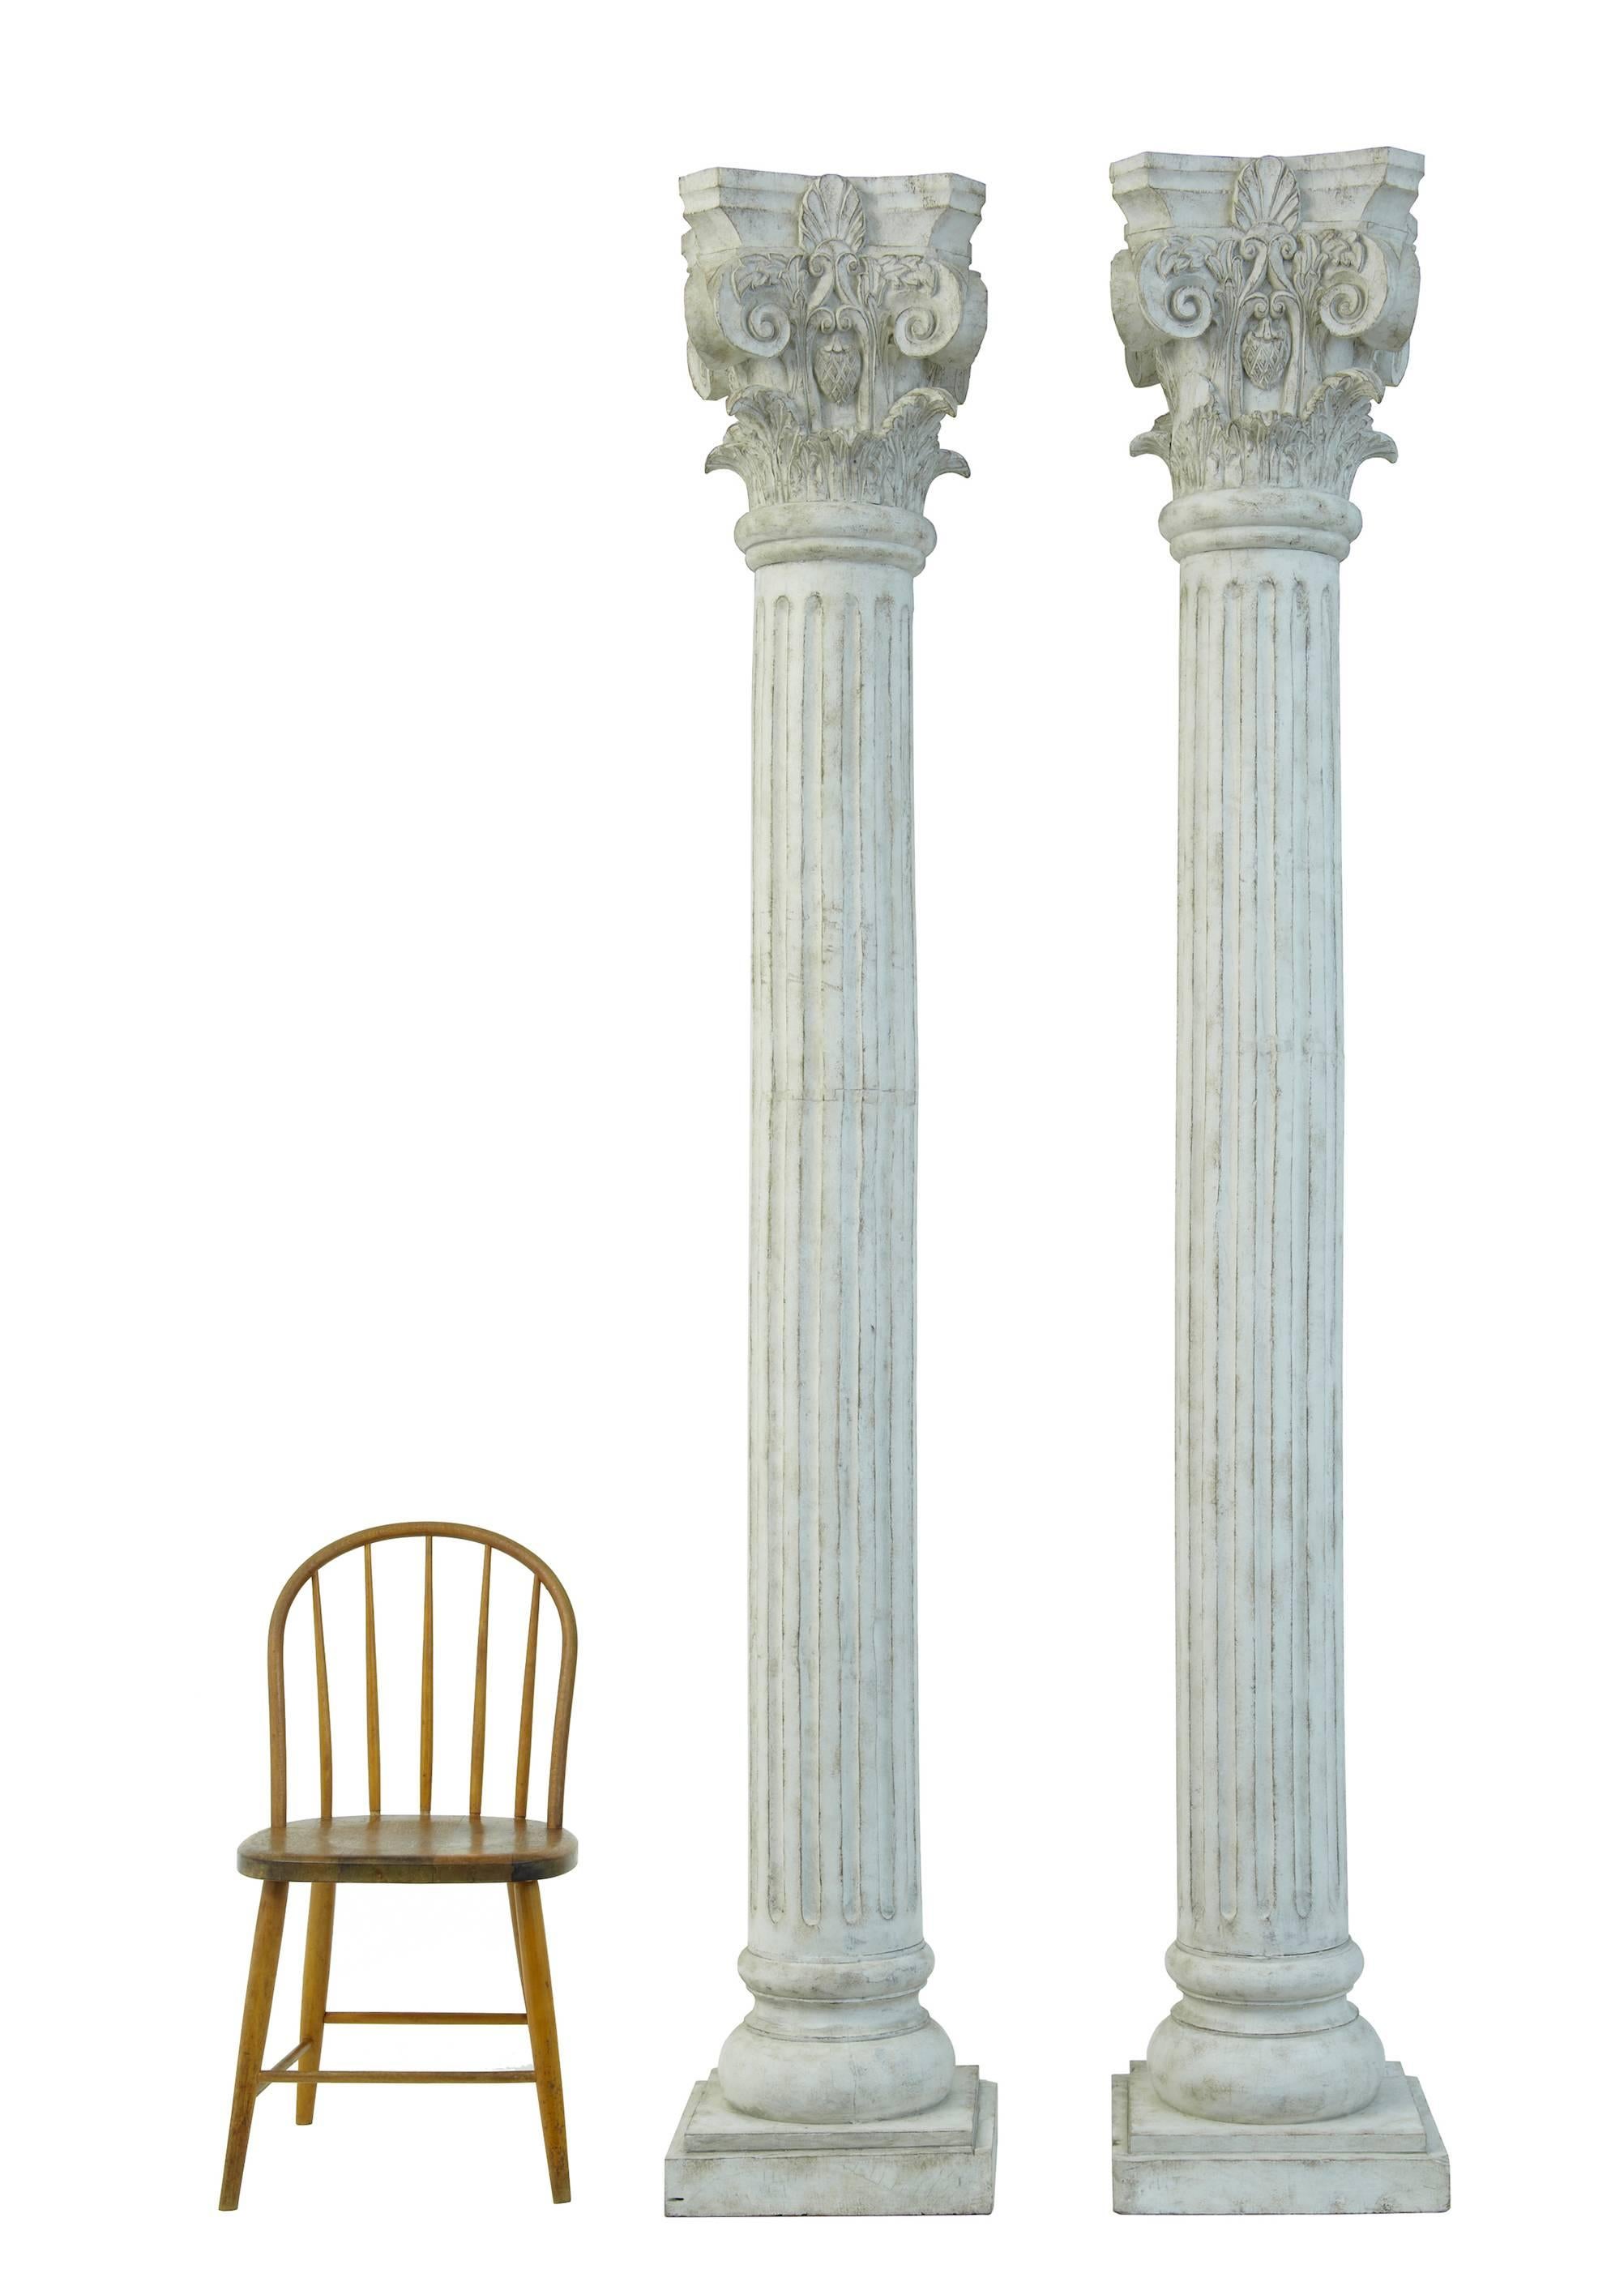 Impressive pair of carved decorative columns which are over 8 foot tall.
Excellently carved and colored to imitate stone.
Corinthian top with fluted column.
Ideal for creating feature statement pieces.

There is a chair alongside in 1 picture